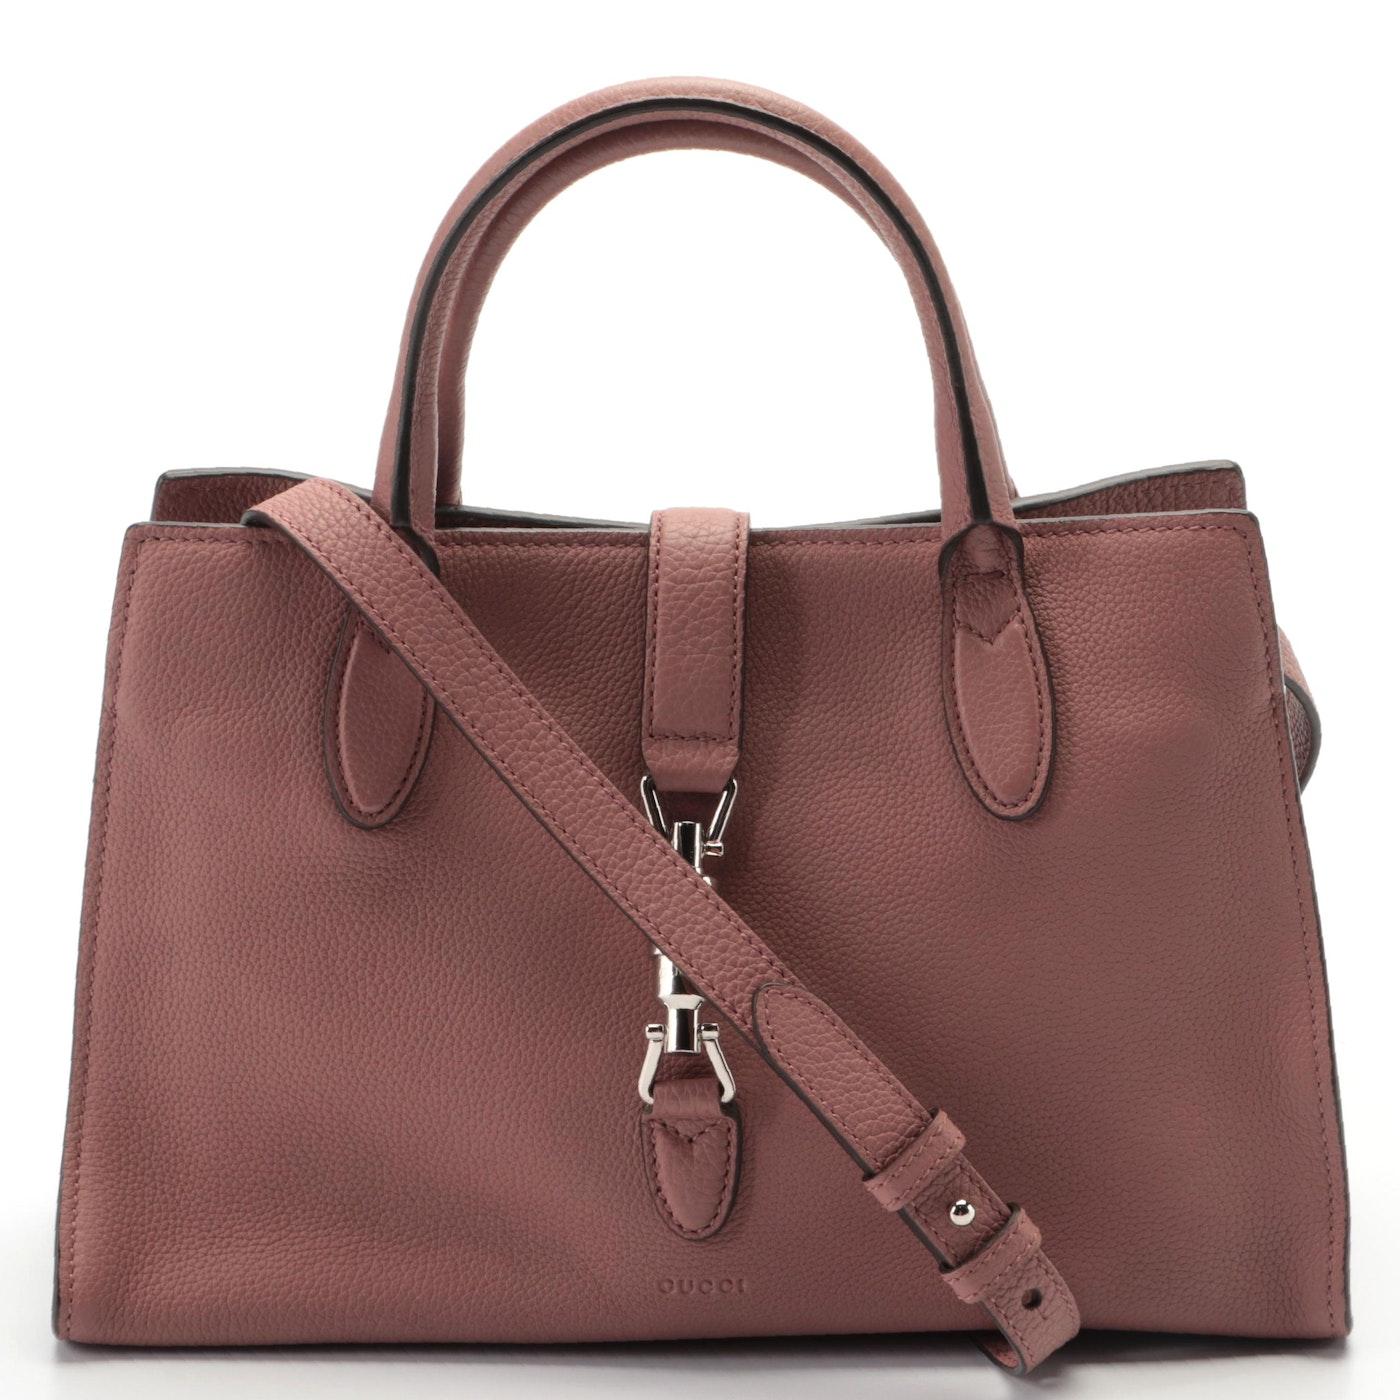 New Gucci Medium Soft Jackie Tote Bag in Full-Grained Leather w/ Piston Closure For Sale 4